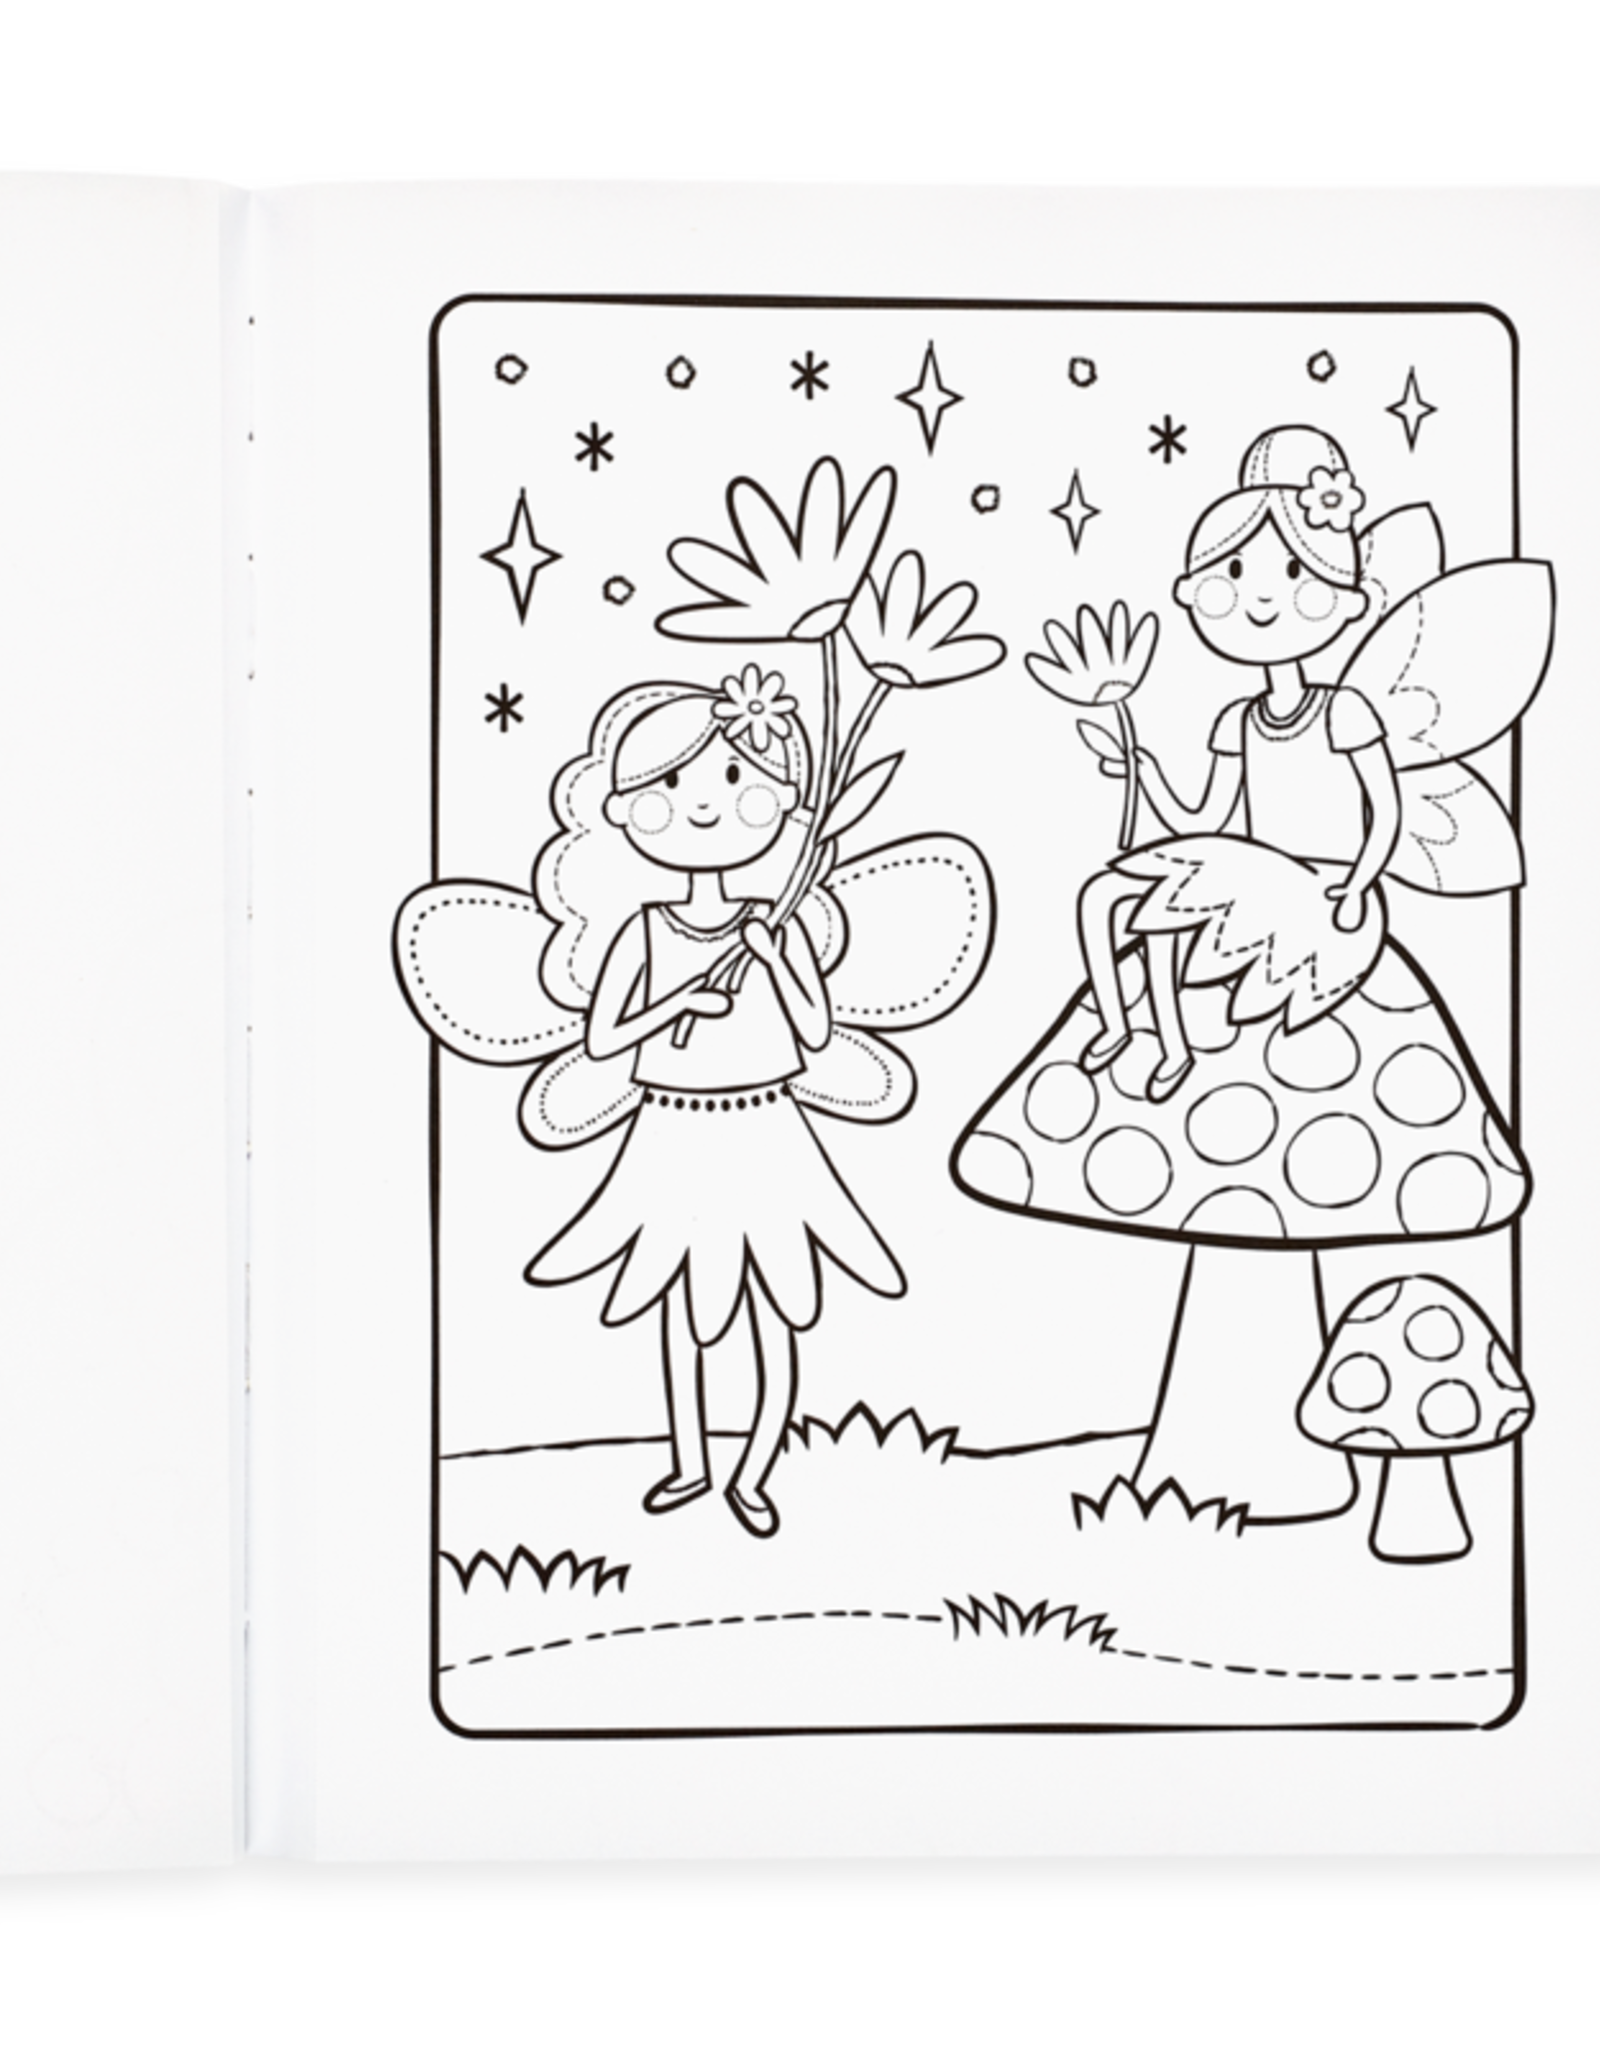 OOLY Princess & Fairies  Color-in-book